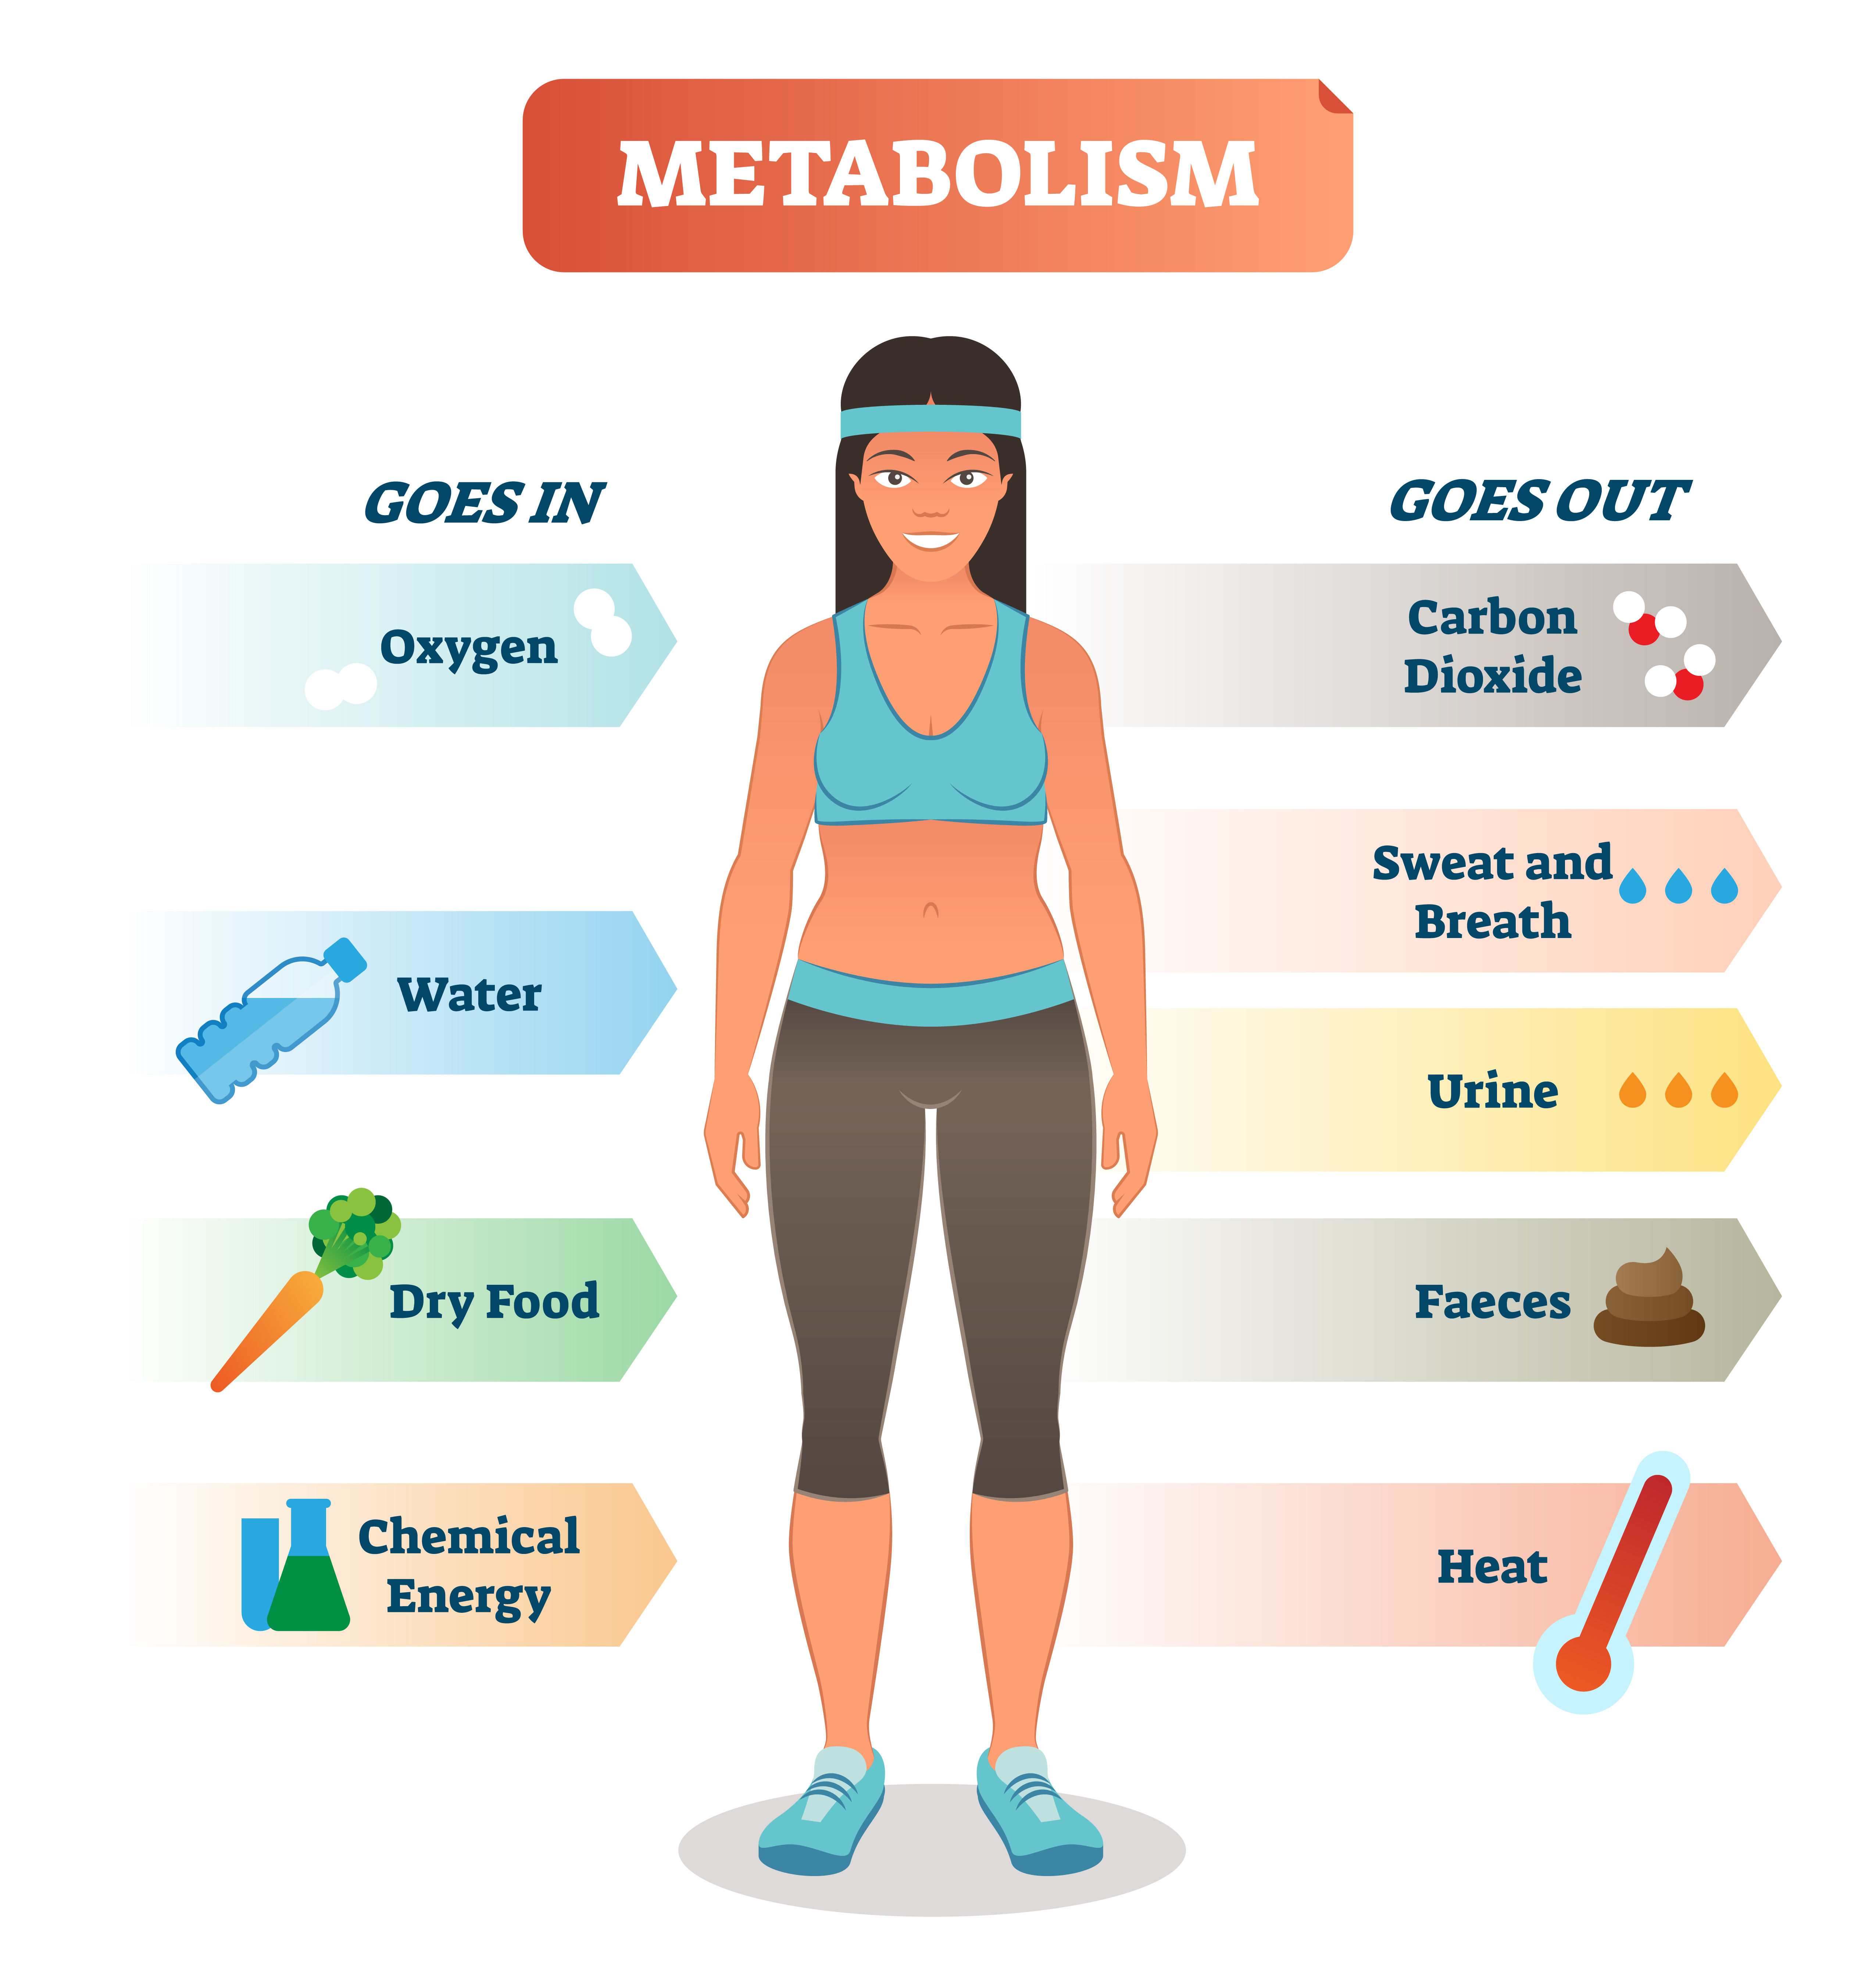 How the human metabolism works in very short and simplified way!